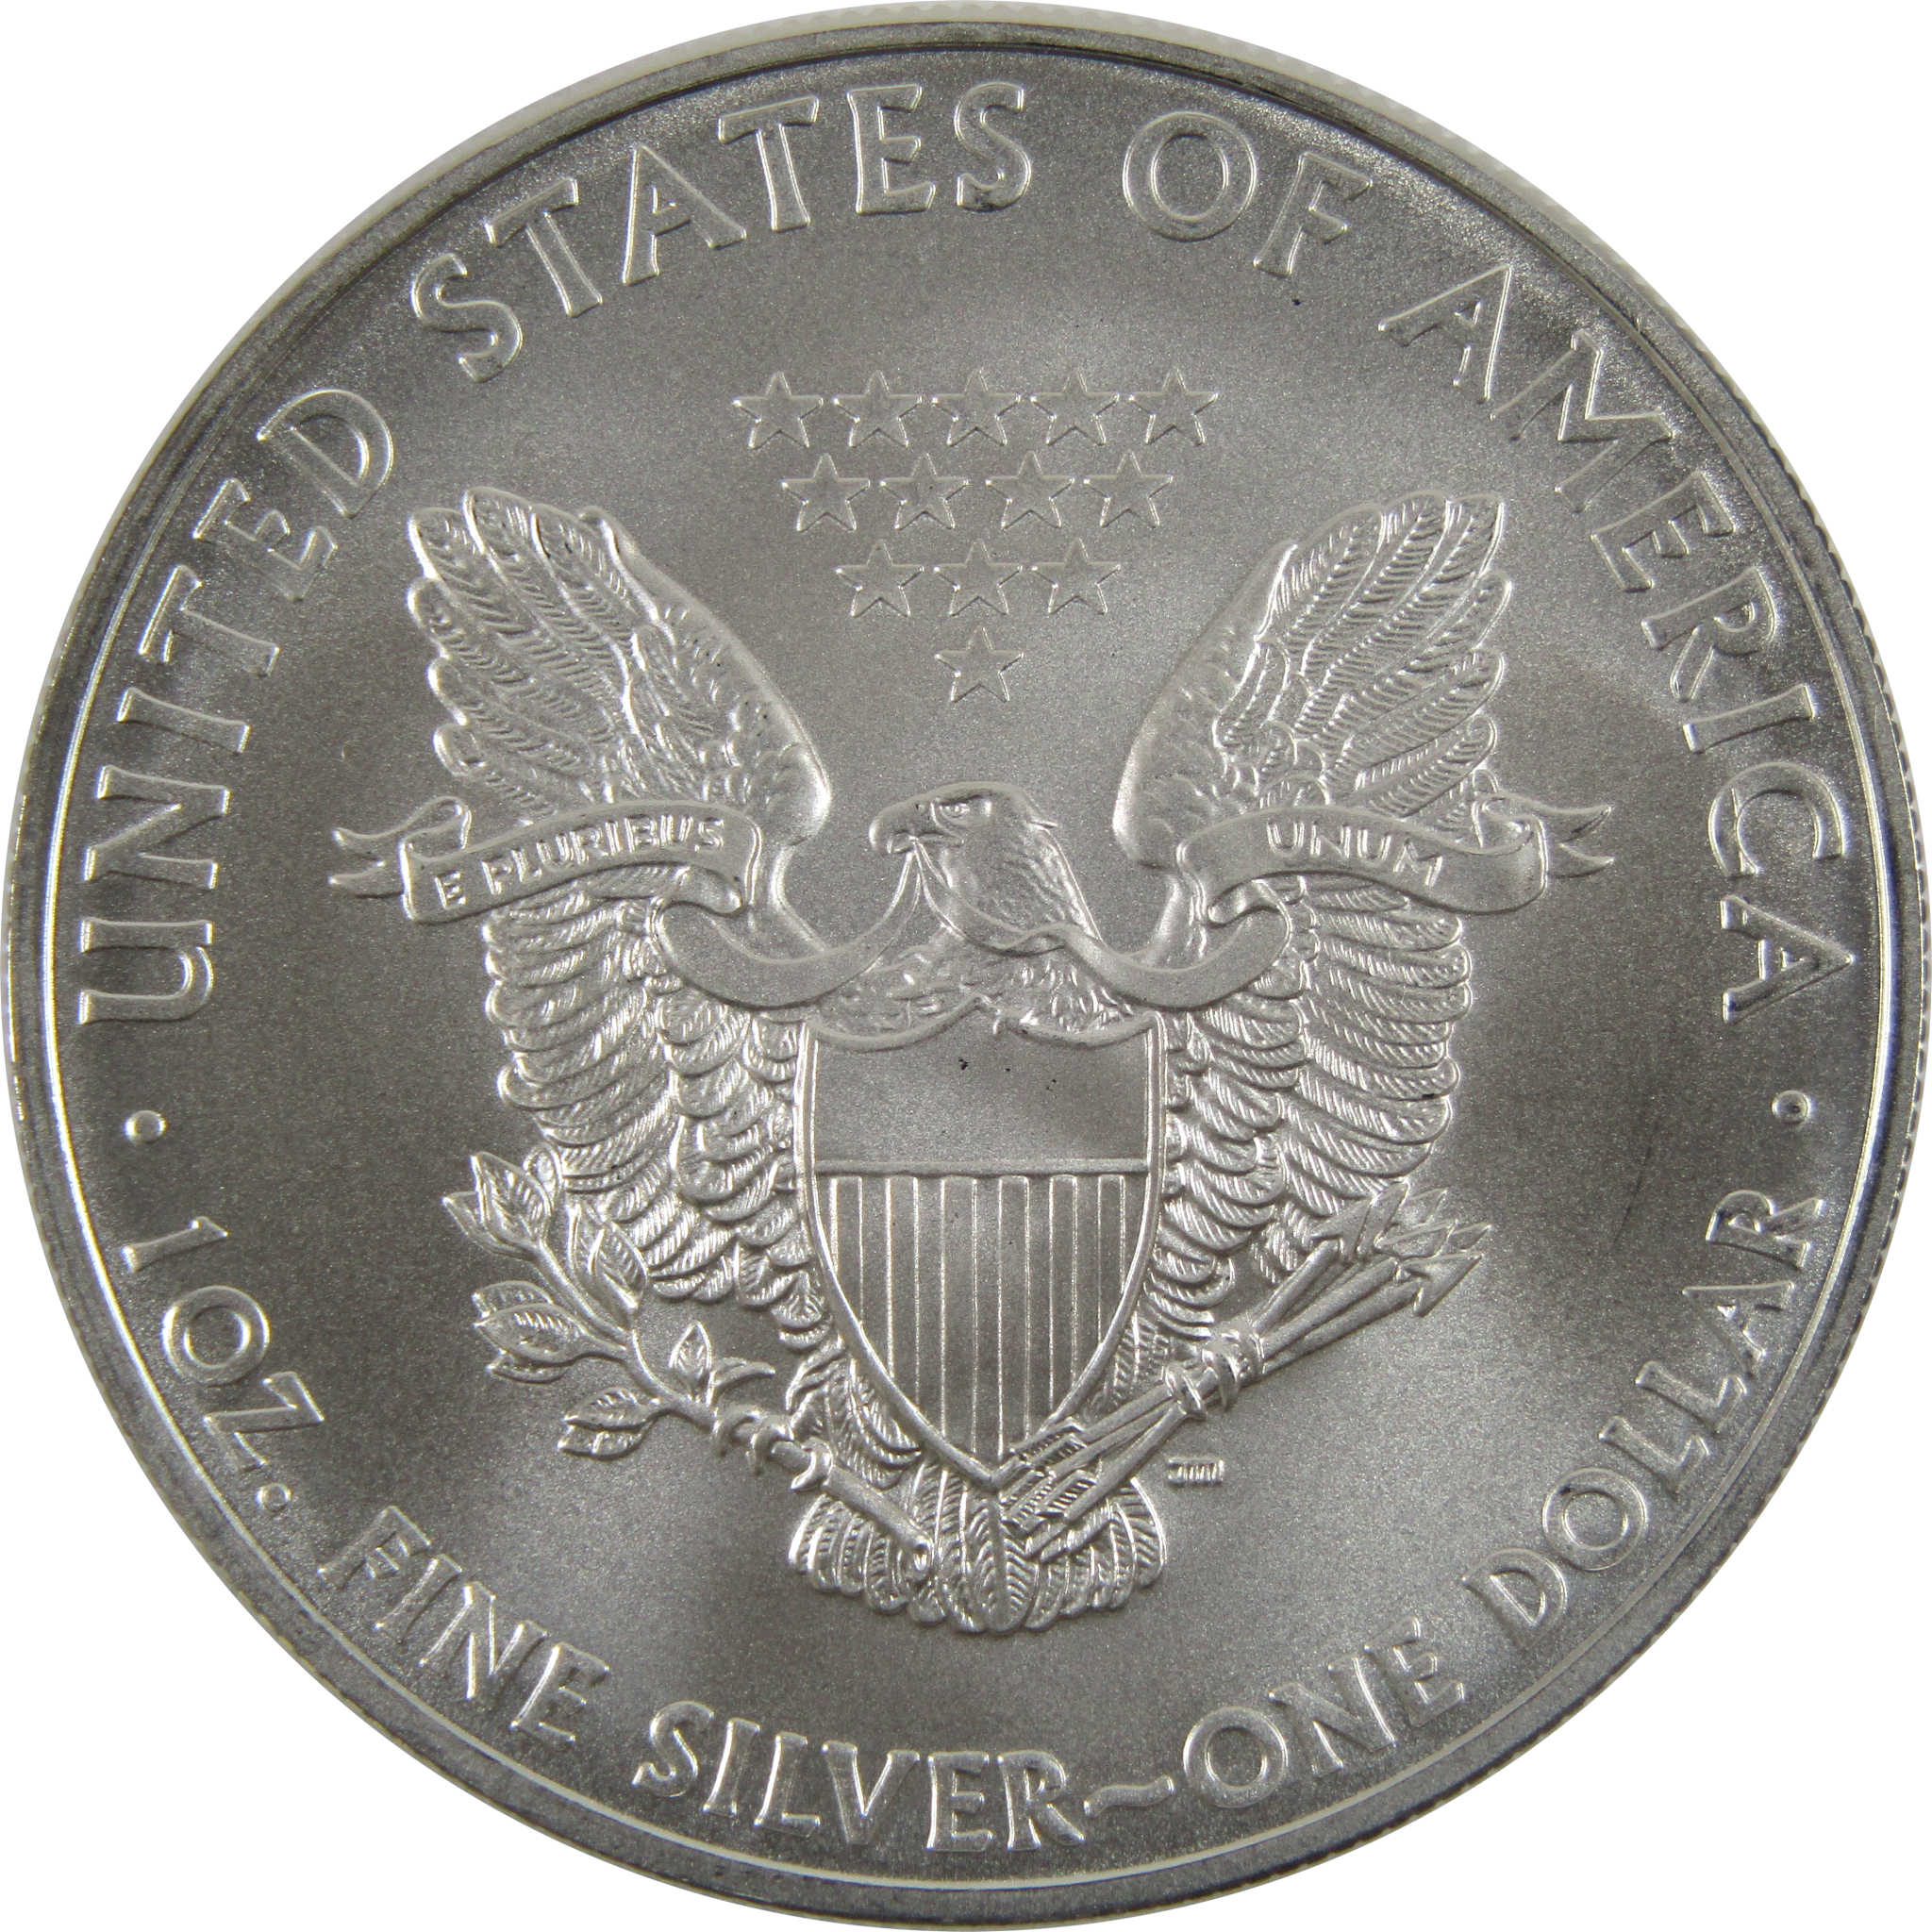 1794-2019 America's First Silver Dollar 1-oz Silver Proof